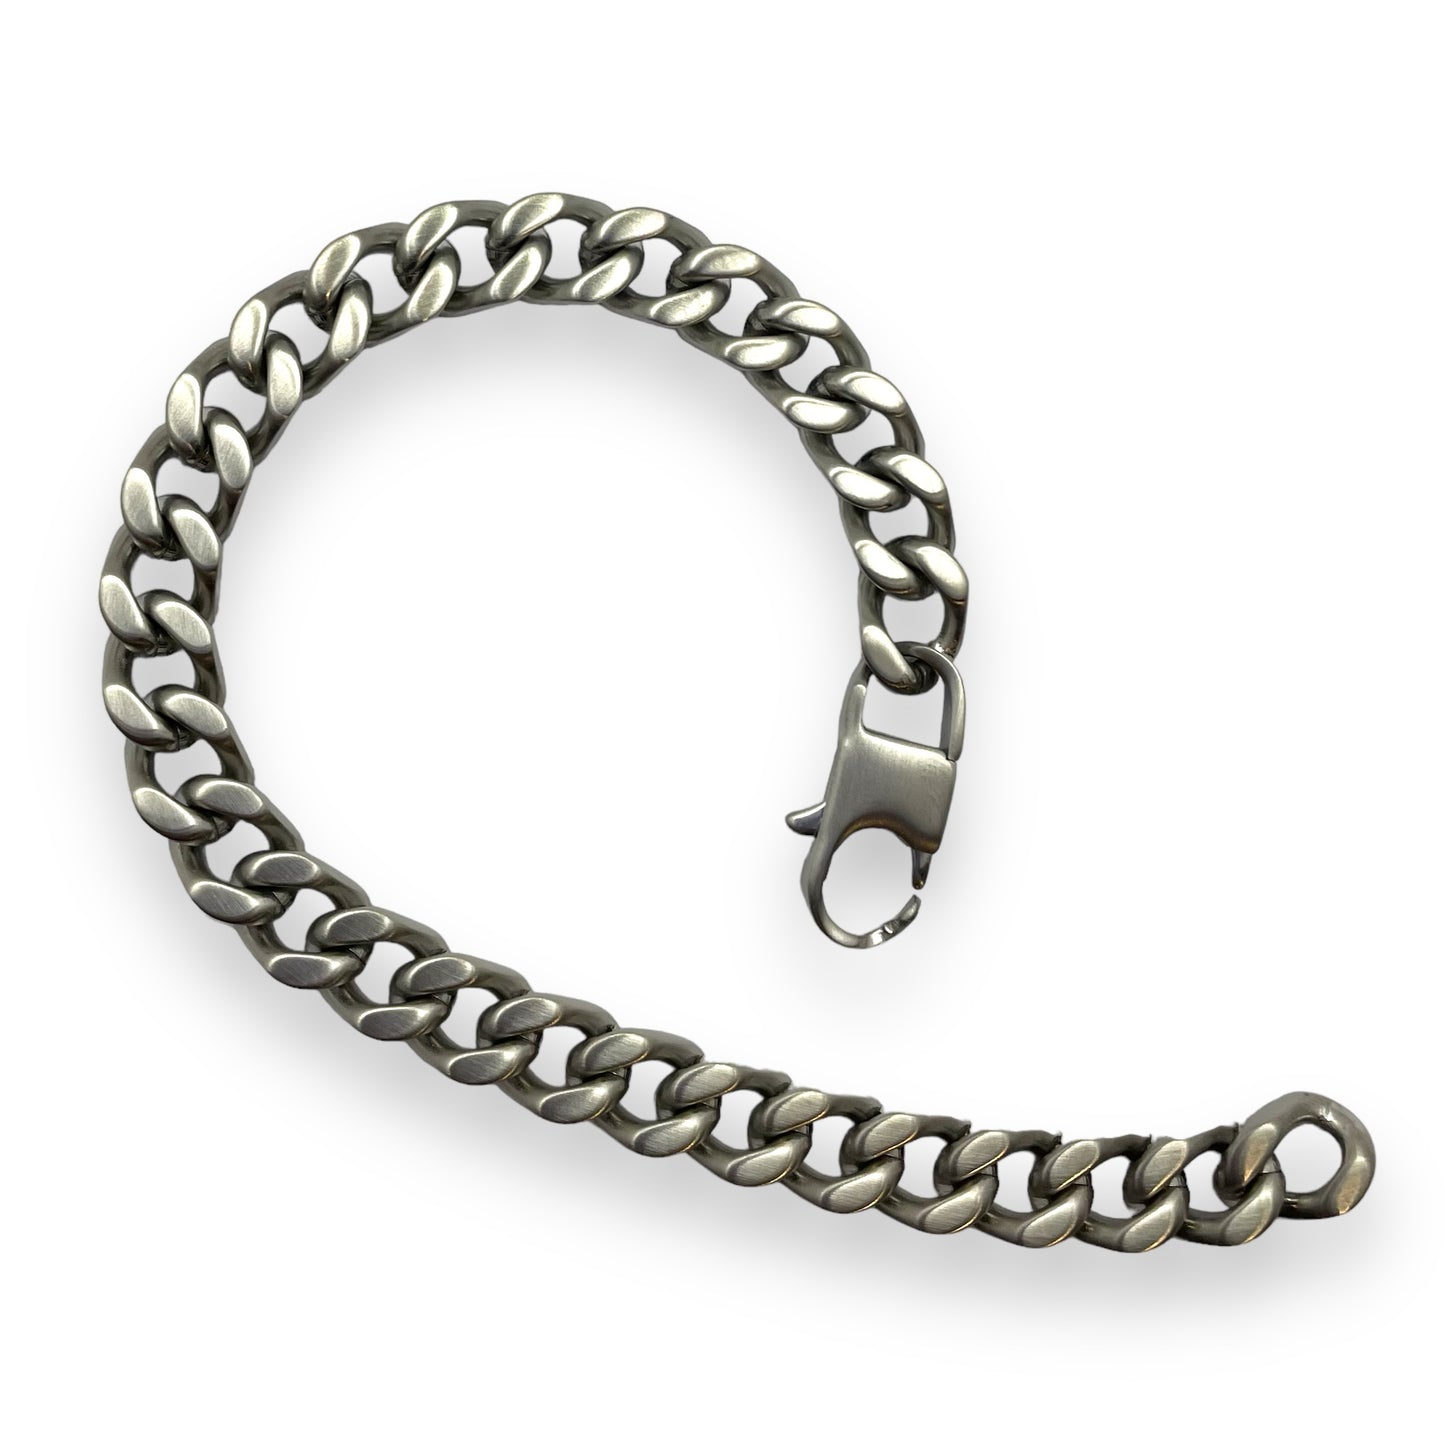 Brushed Finish Bracelet in Surgical Stainless Steel